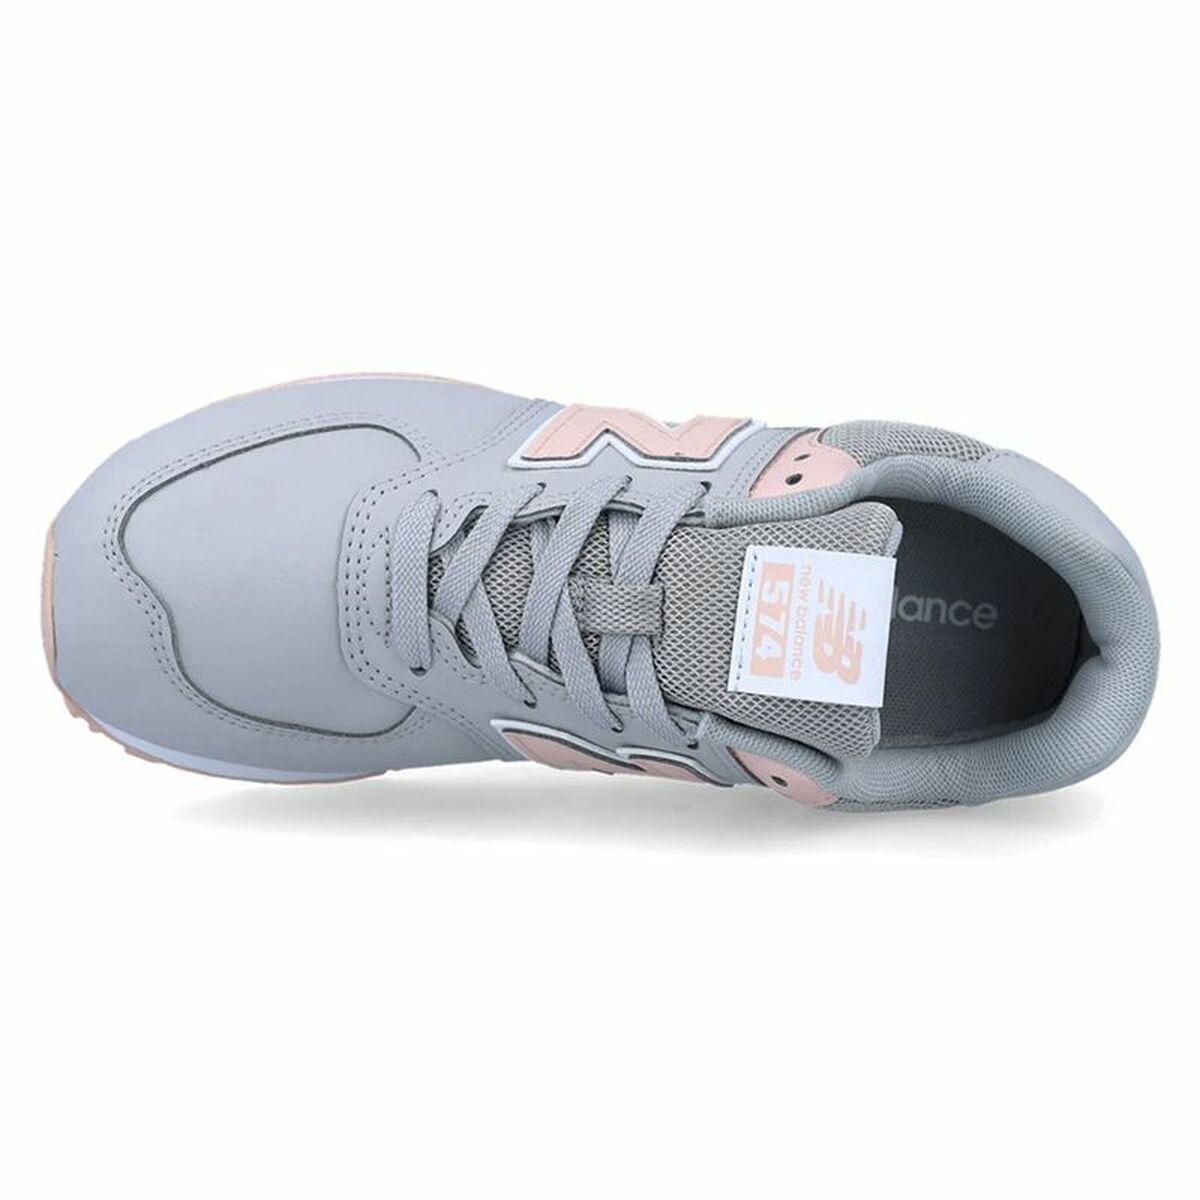 New Balance Women's Casual Trainers 574 Grey Pink in Blue | Lyst